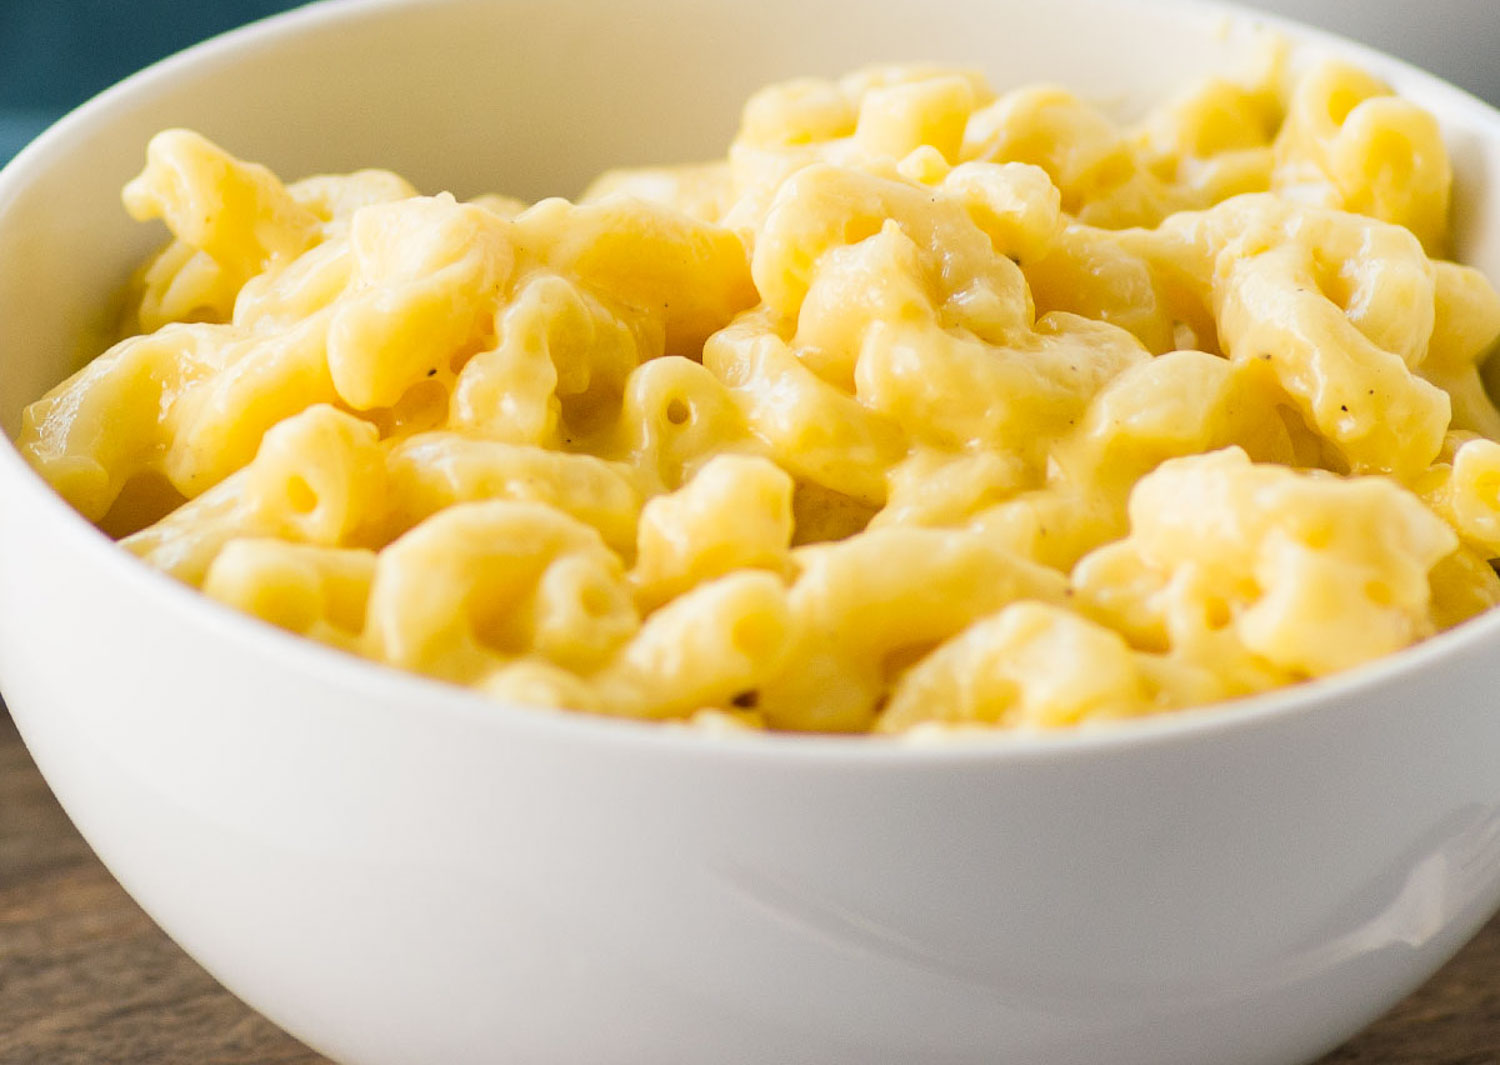 A white bowl of macaroni and cheese in it.